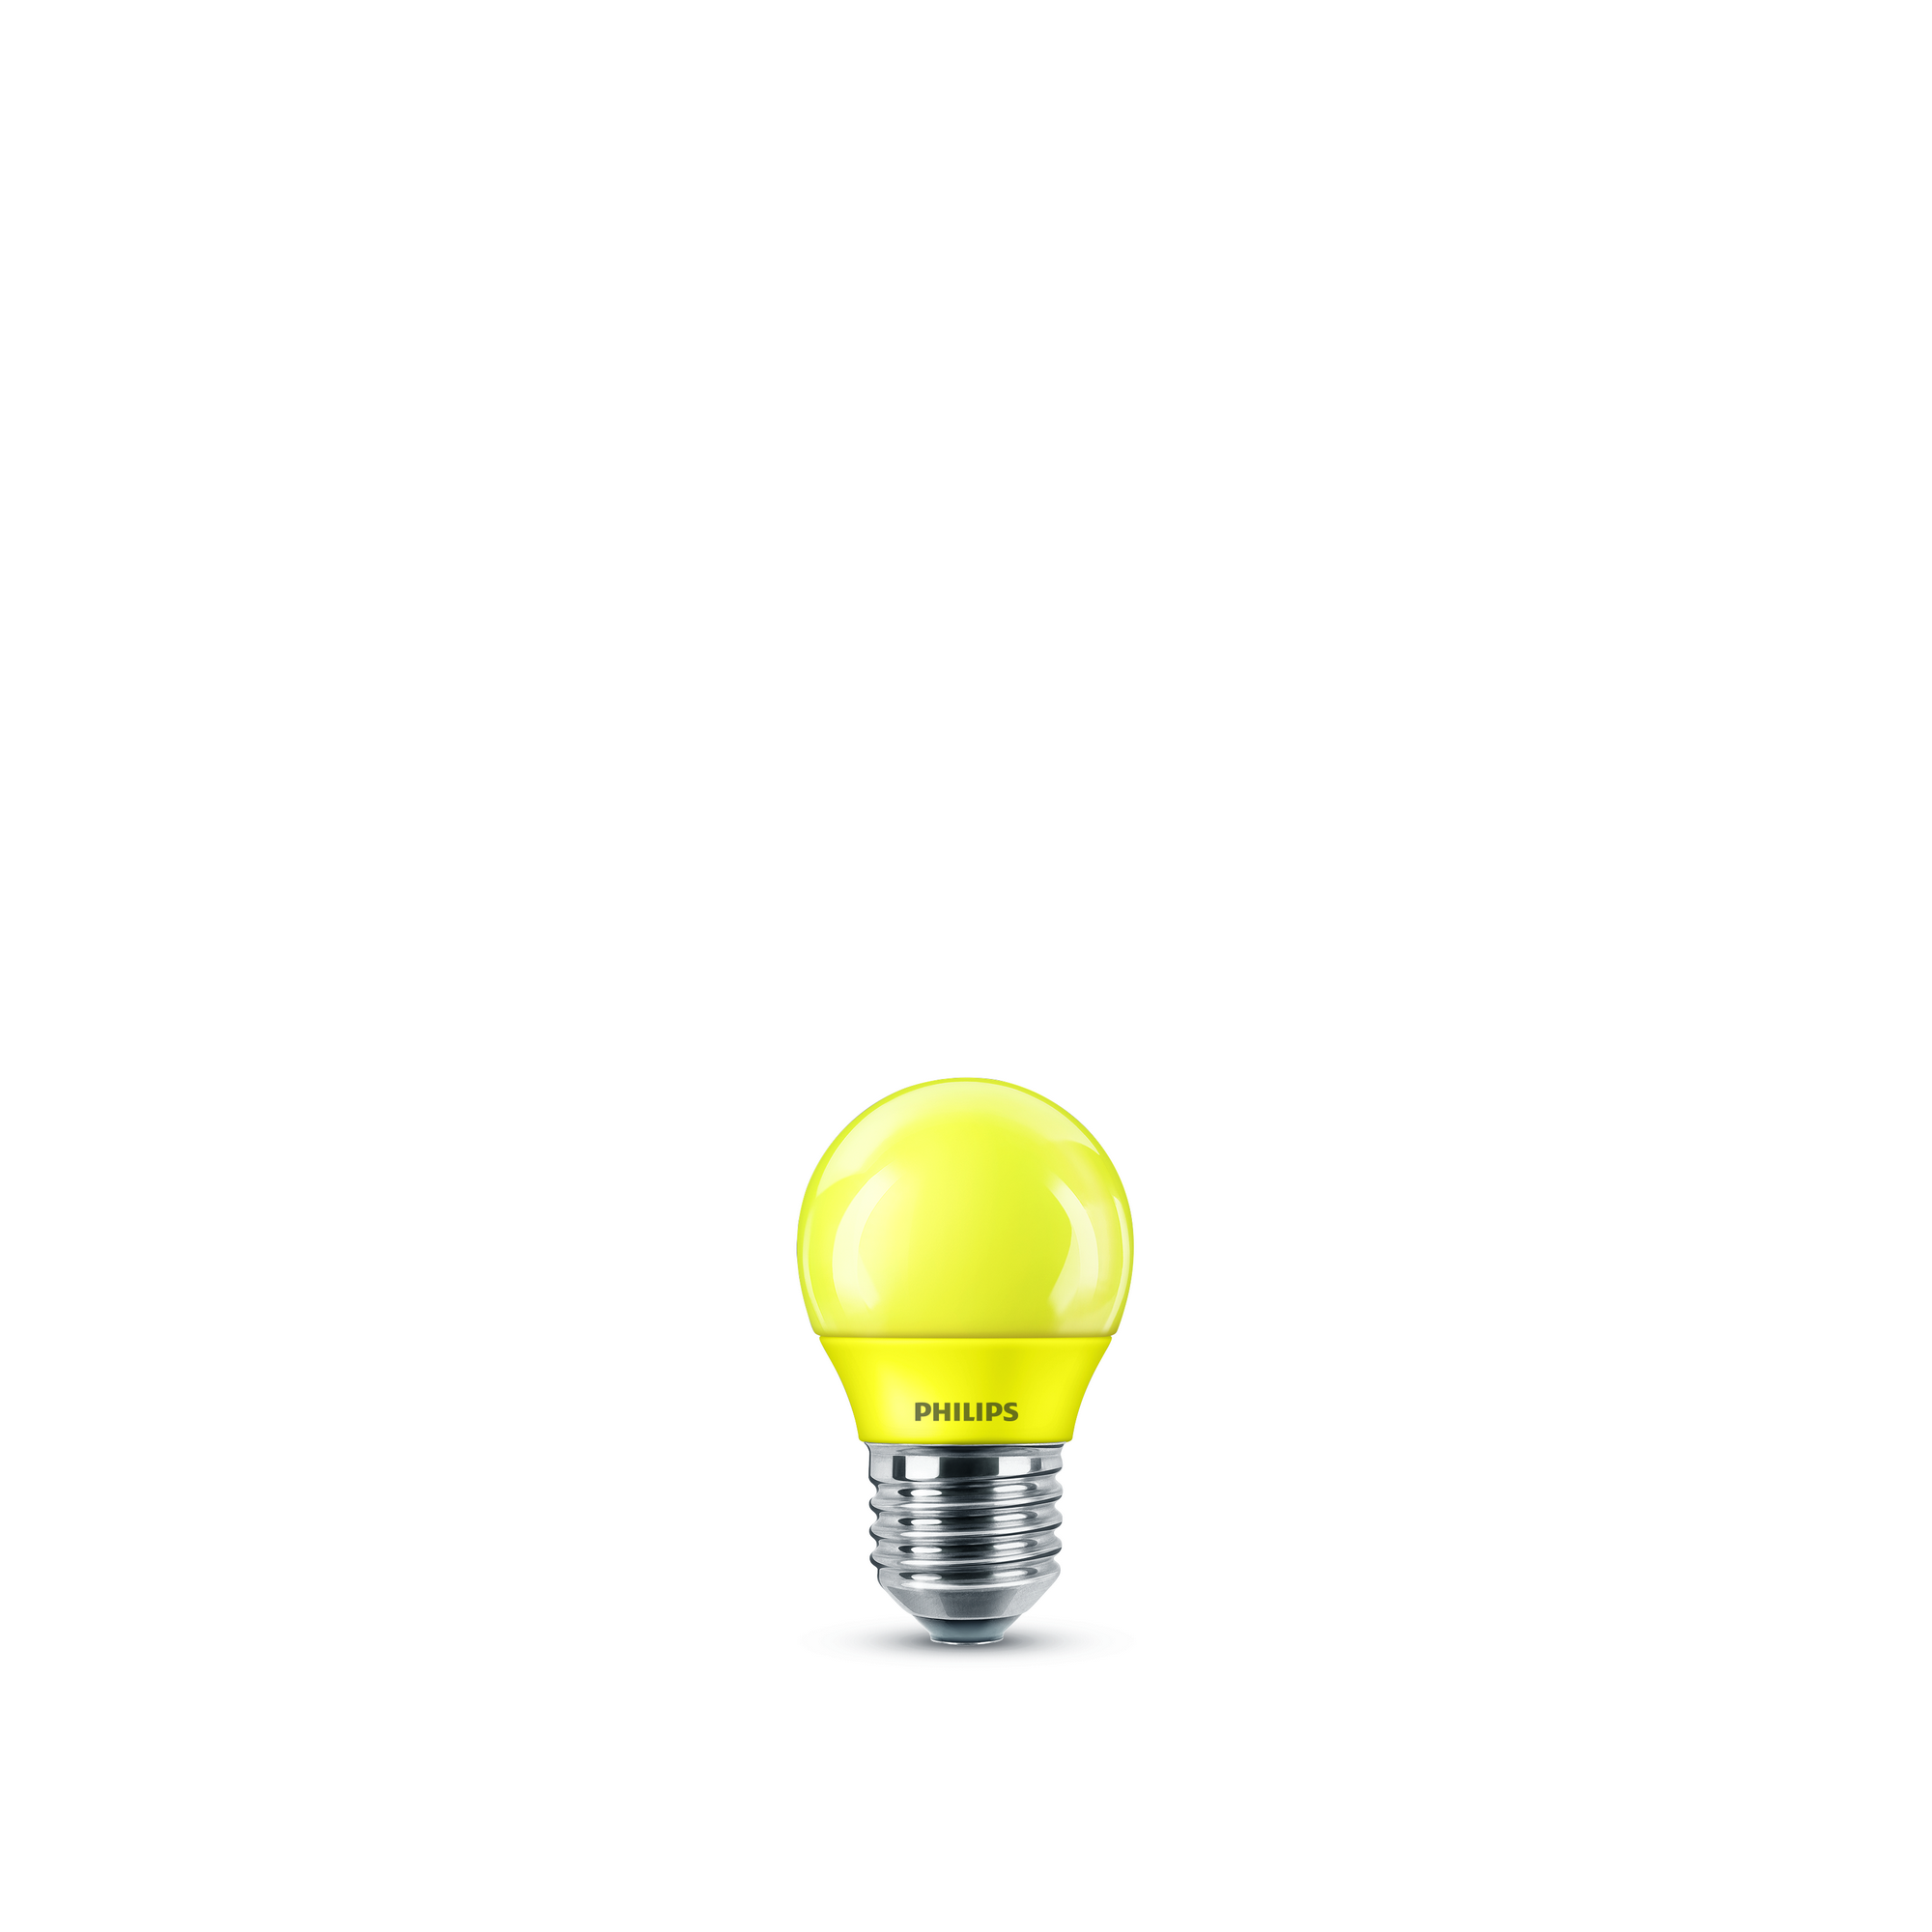 LED 15W A60 E27 yellow 230V FR + product picture